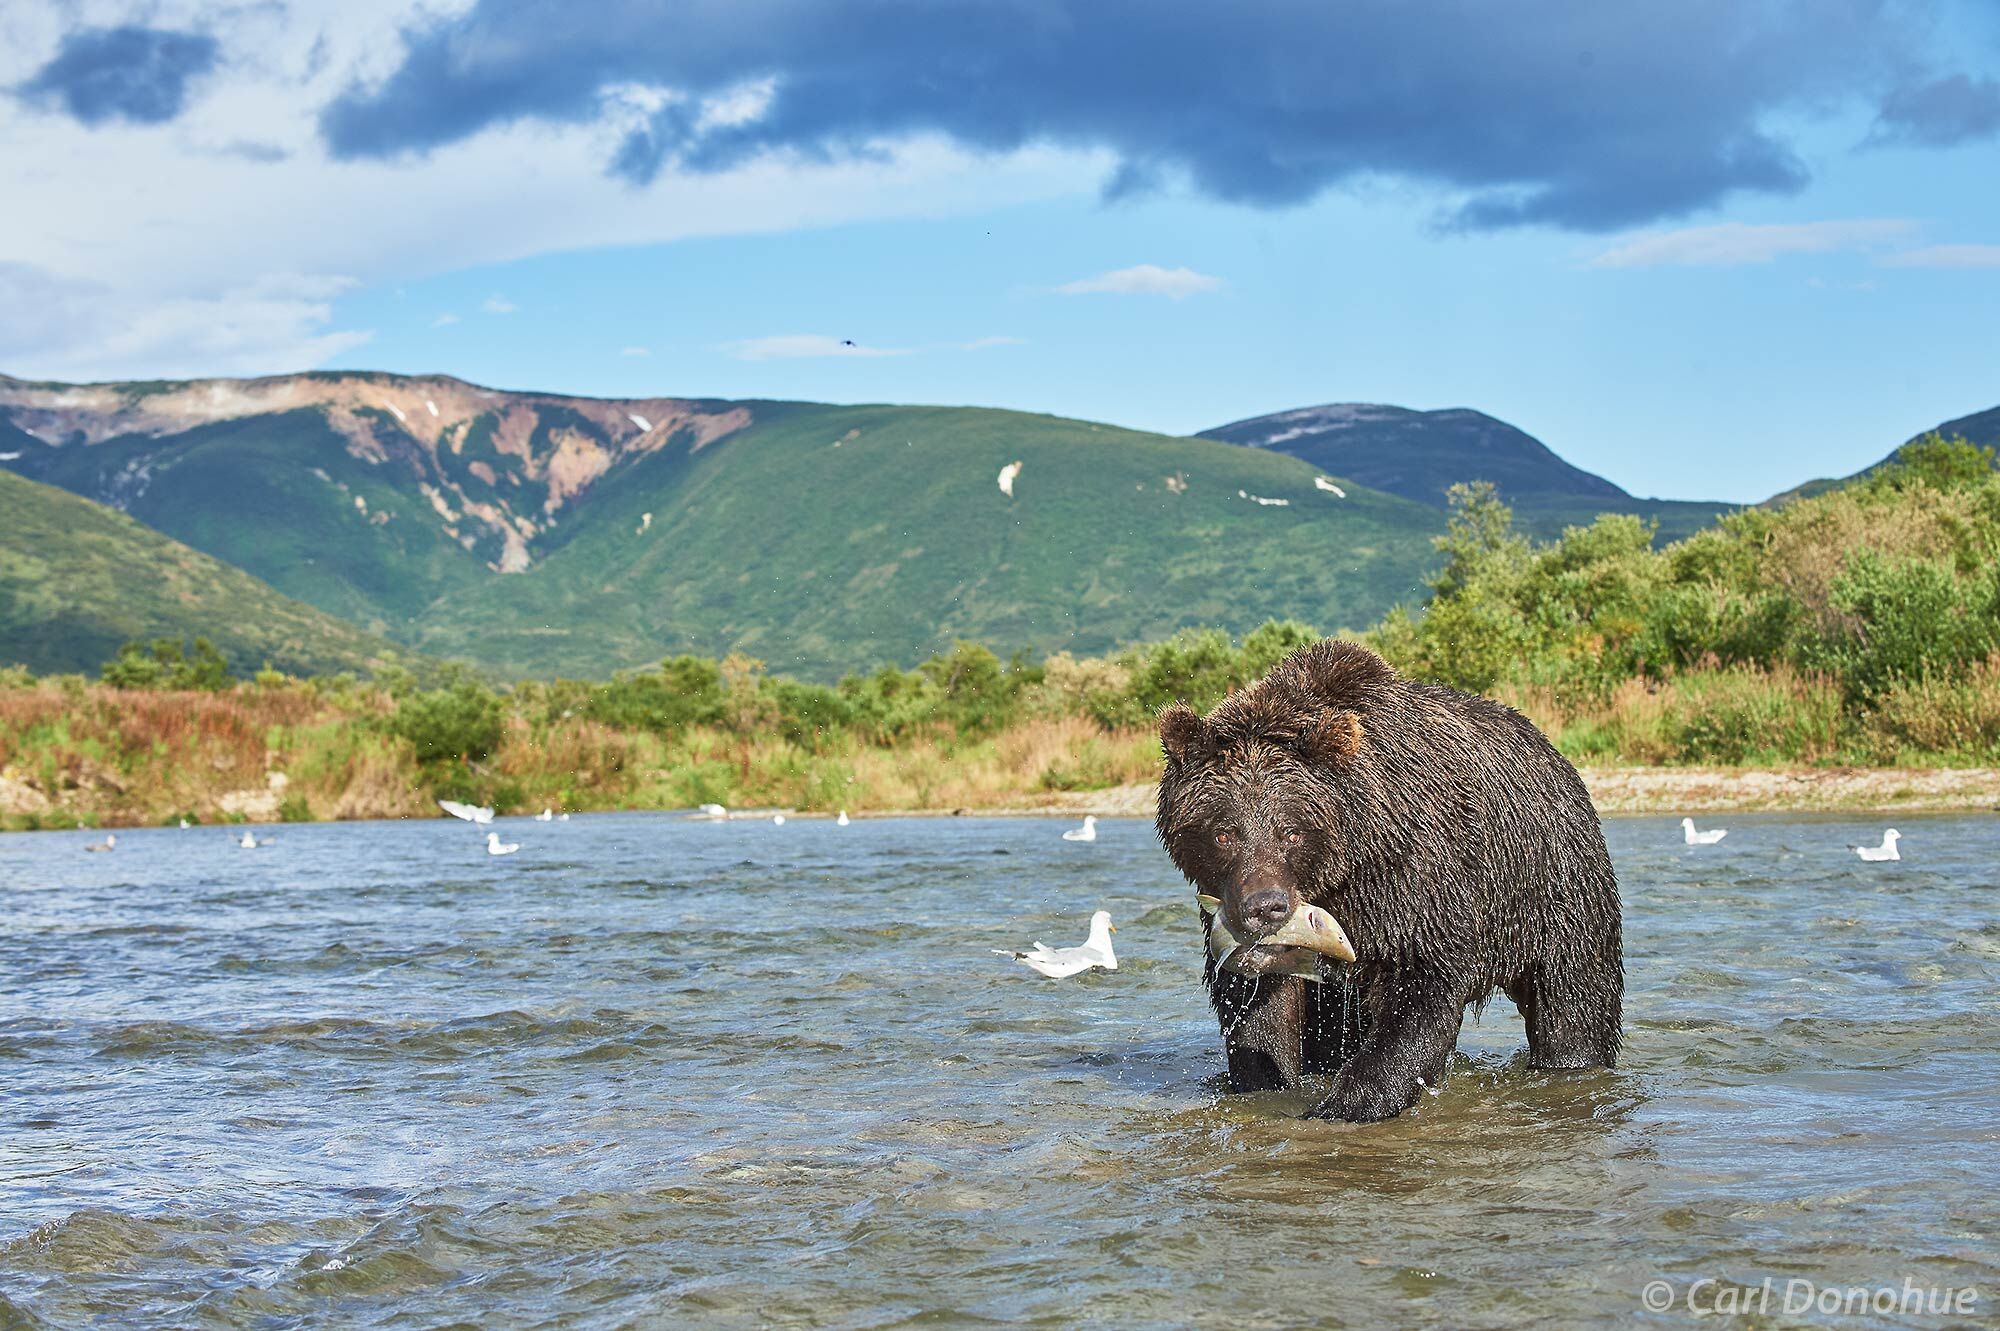 Catch of the Day! A brown bear, o grizzly bear (Ursus arctos) eating a just caught Chum salmon in Katmai National Park and Preserve...